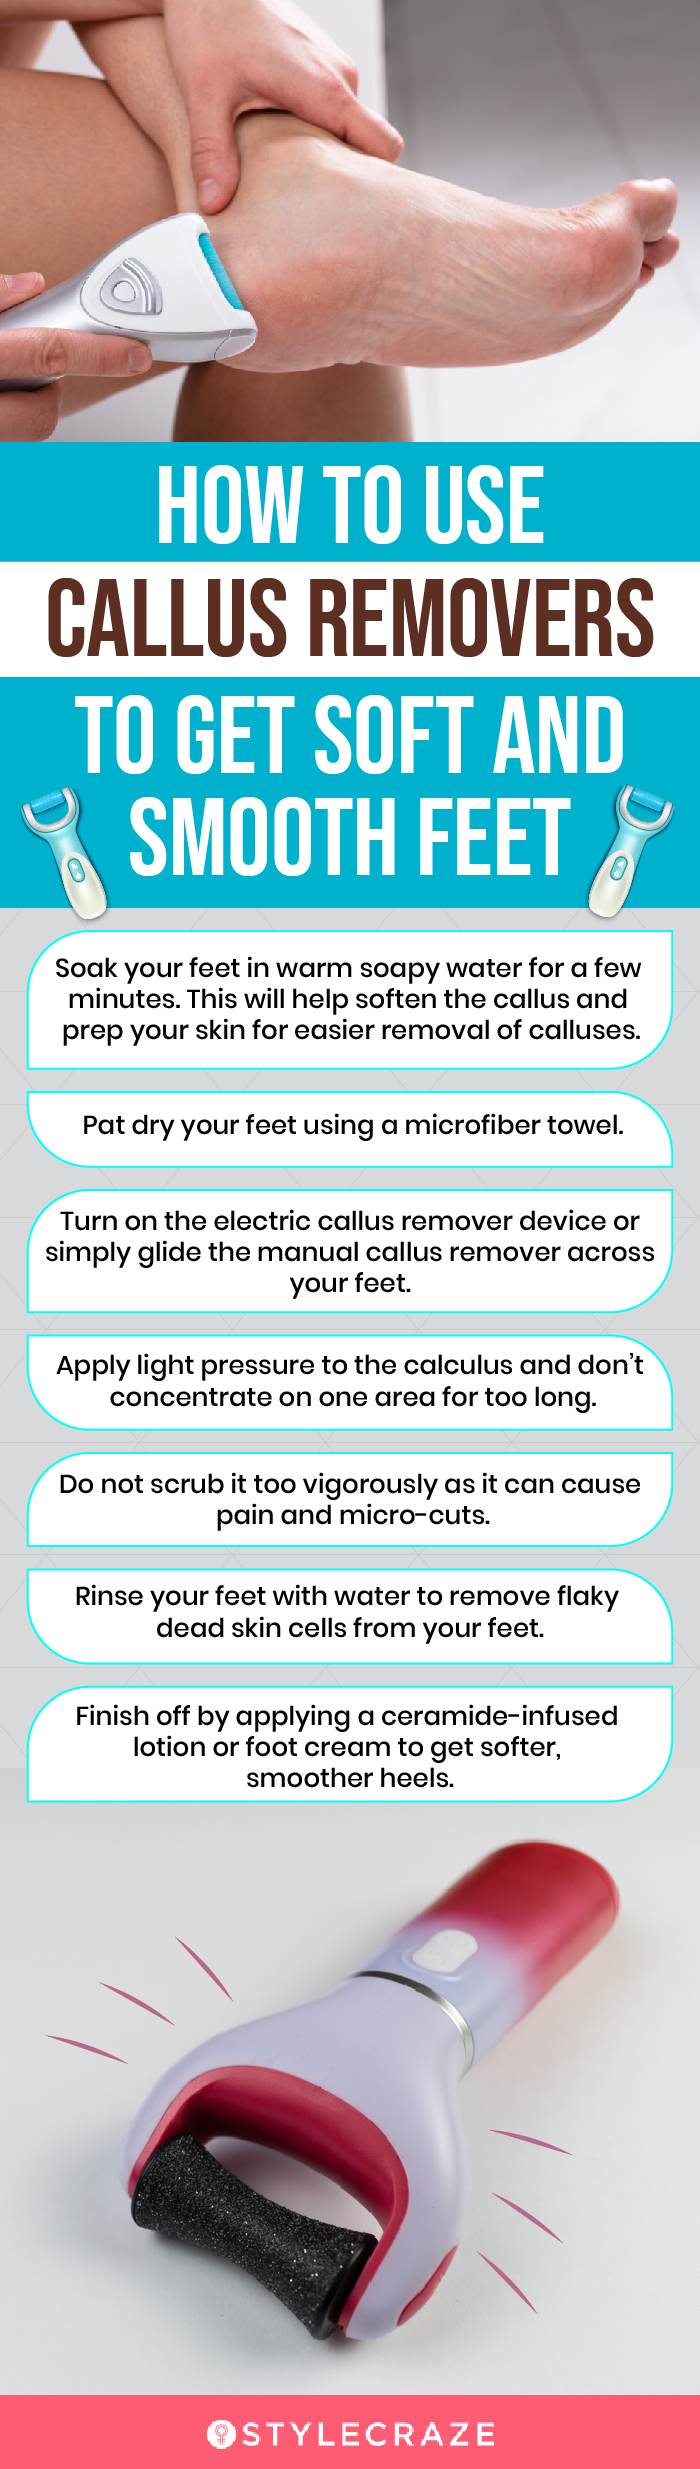 How To Use Callus Removers To Get Soft And Smooth Feet (infographic)